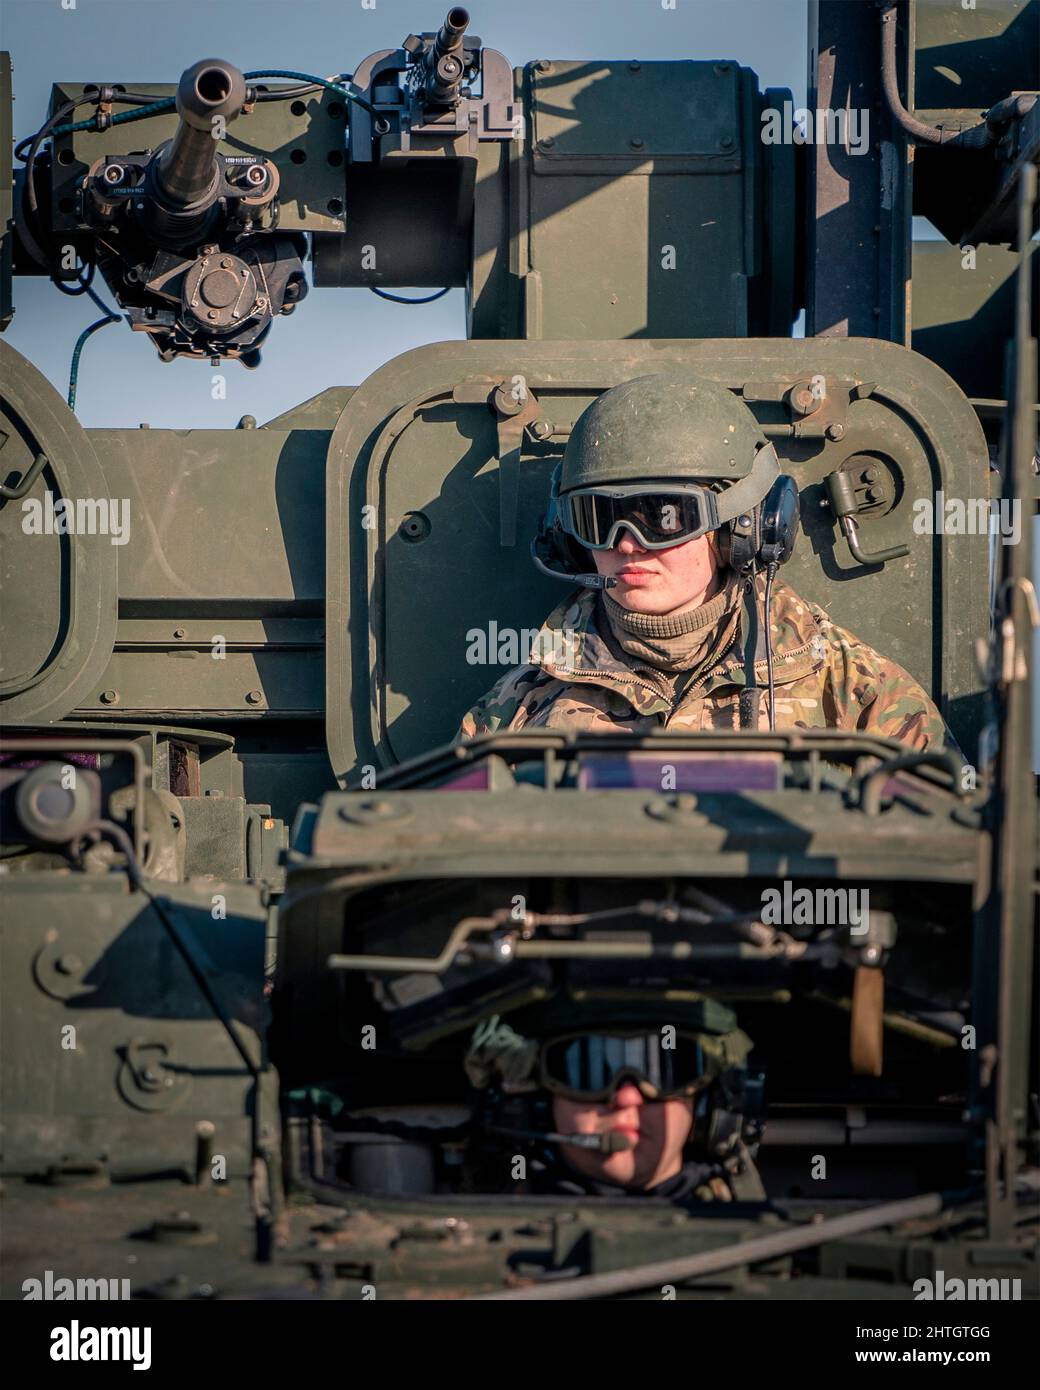 Orzysz, Poland. 24 February, 2022. U.S. Army soldiers, assigned to 5th Battalion, 4th Air Defense Artillery Regiment, direct a Stryker A1 IM-SHORAD system at Bemowo Piskie Training Area, February 24, 2022 outside of Orzysz, Poland. The U.S. has increased NATO forces in the region to counter the Russia threat against Ukraine.  Credit: Maj. Robert Fellingham/U.S Army/Alamy Live News Stock Photo